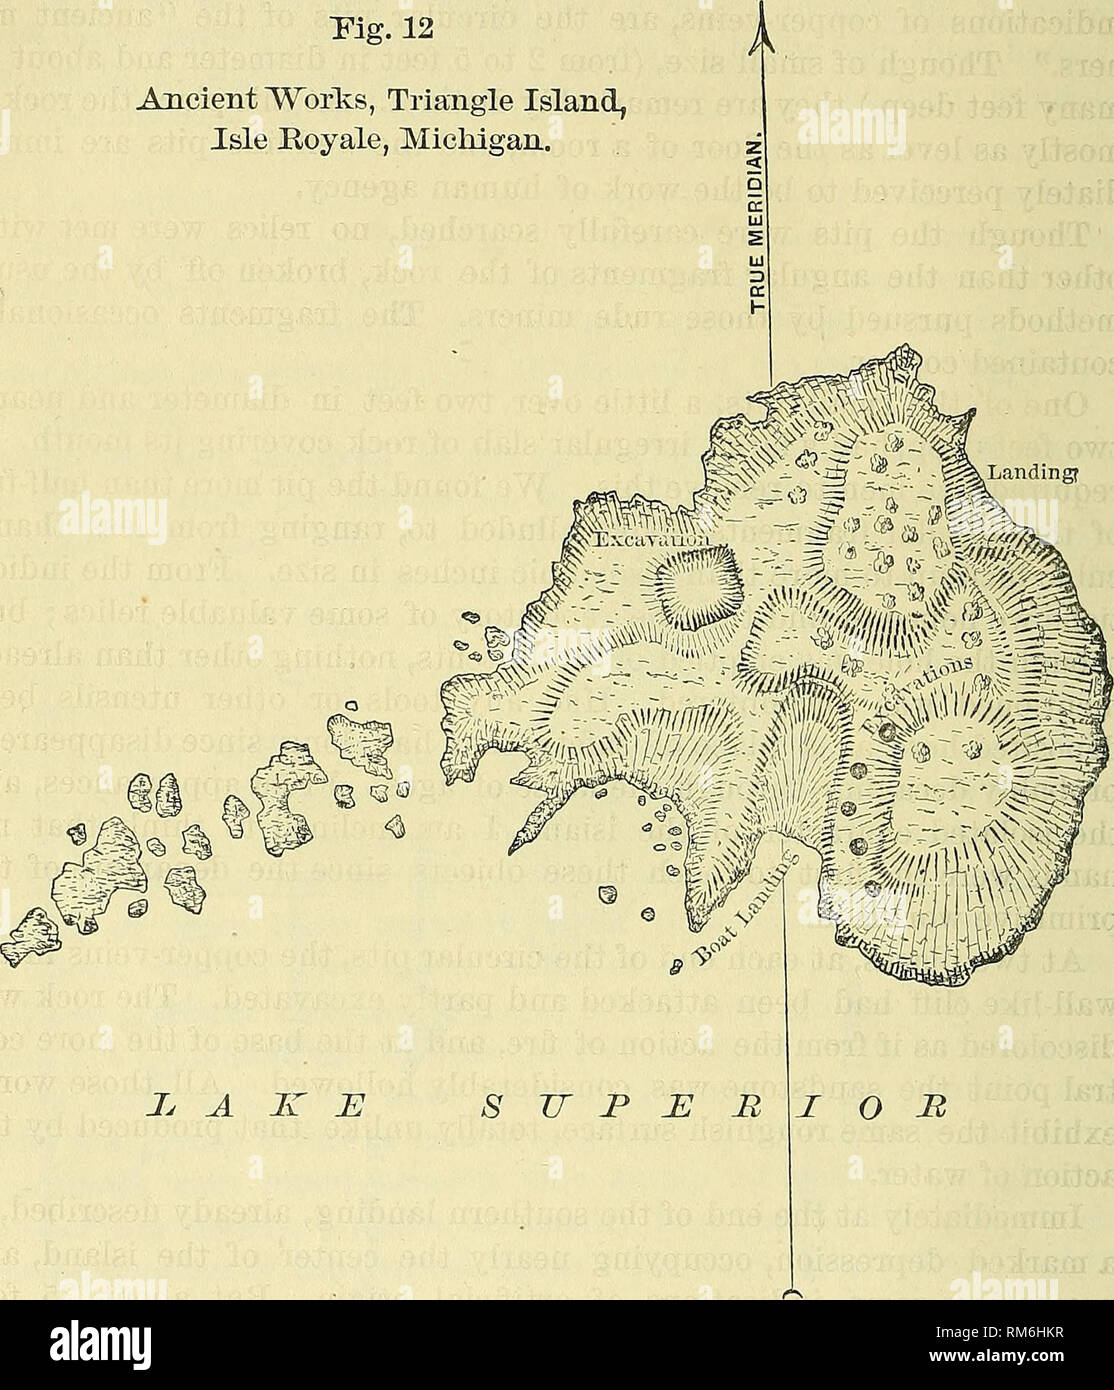 . Annual report of the Board of Regents of the Smithsonian Institution. Smithsonian Institution; Smithsonian Institution. Archives; Discoveries in science. 388 ETHNOLOGY. Triangle Island, it being hitherto unnamed on any of the maps. This island lies about three-quarters of a mile southwest of Washiug- ton Island, the largest of the islands off the southwest end of Isle Eoyale, and forming a part of the boundaries dividing Grace from Washington Harbor. [See Fig. ll.J Fig. 12 Ancient TVorlvs, Triangle Island, Isle Royale, Michigan.. J. A K E Triangle Island is a sandstone rock, with very littl Stock Photo